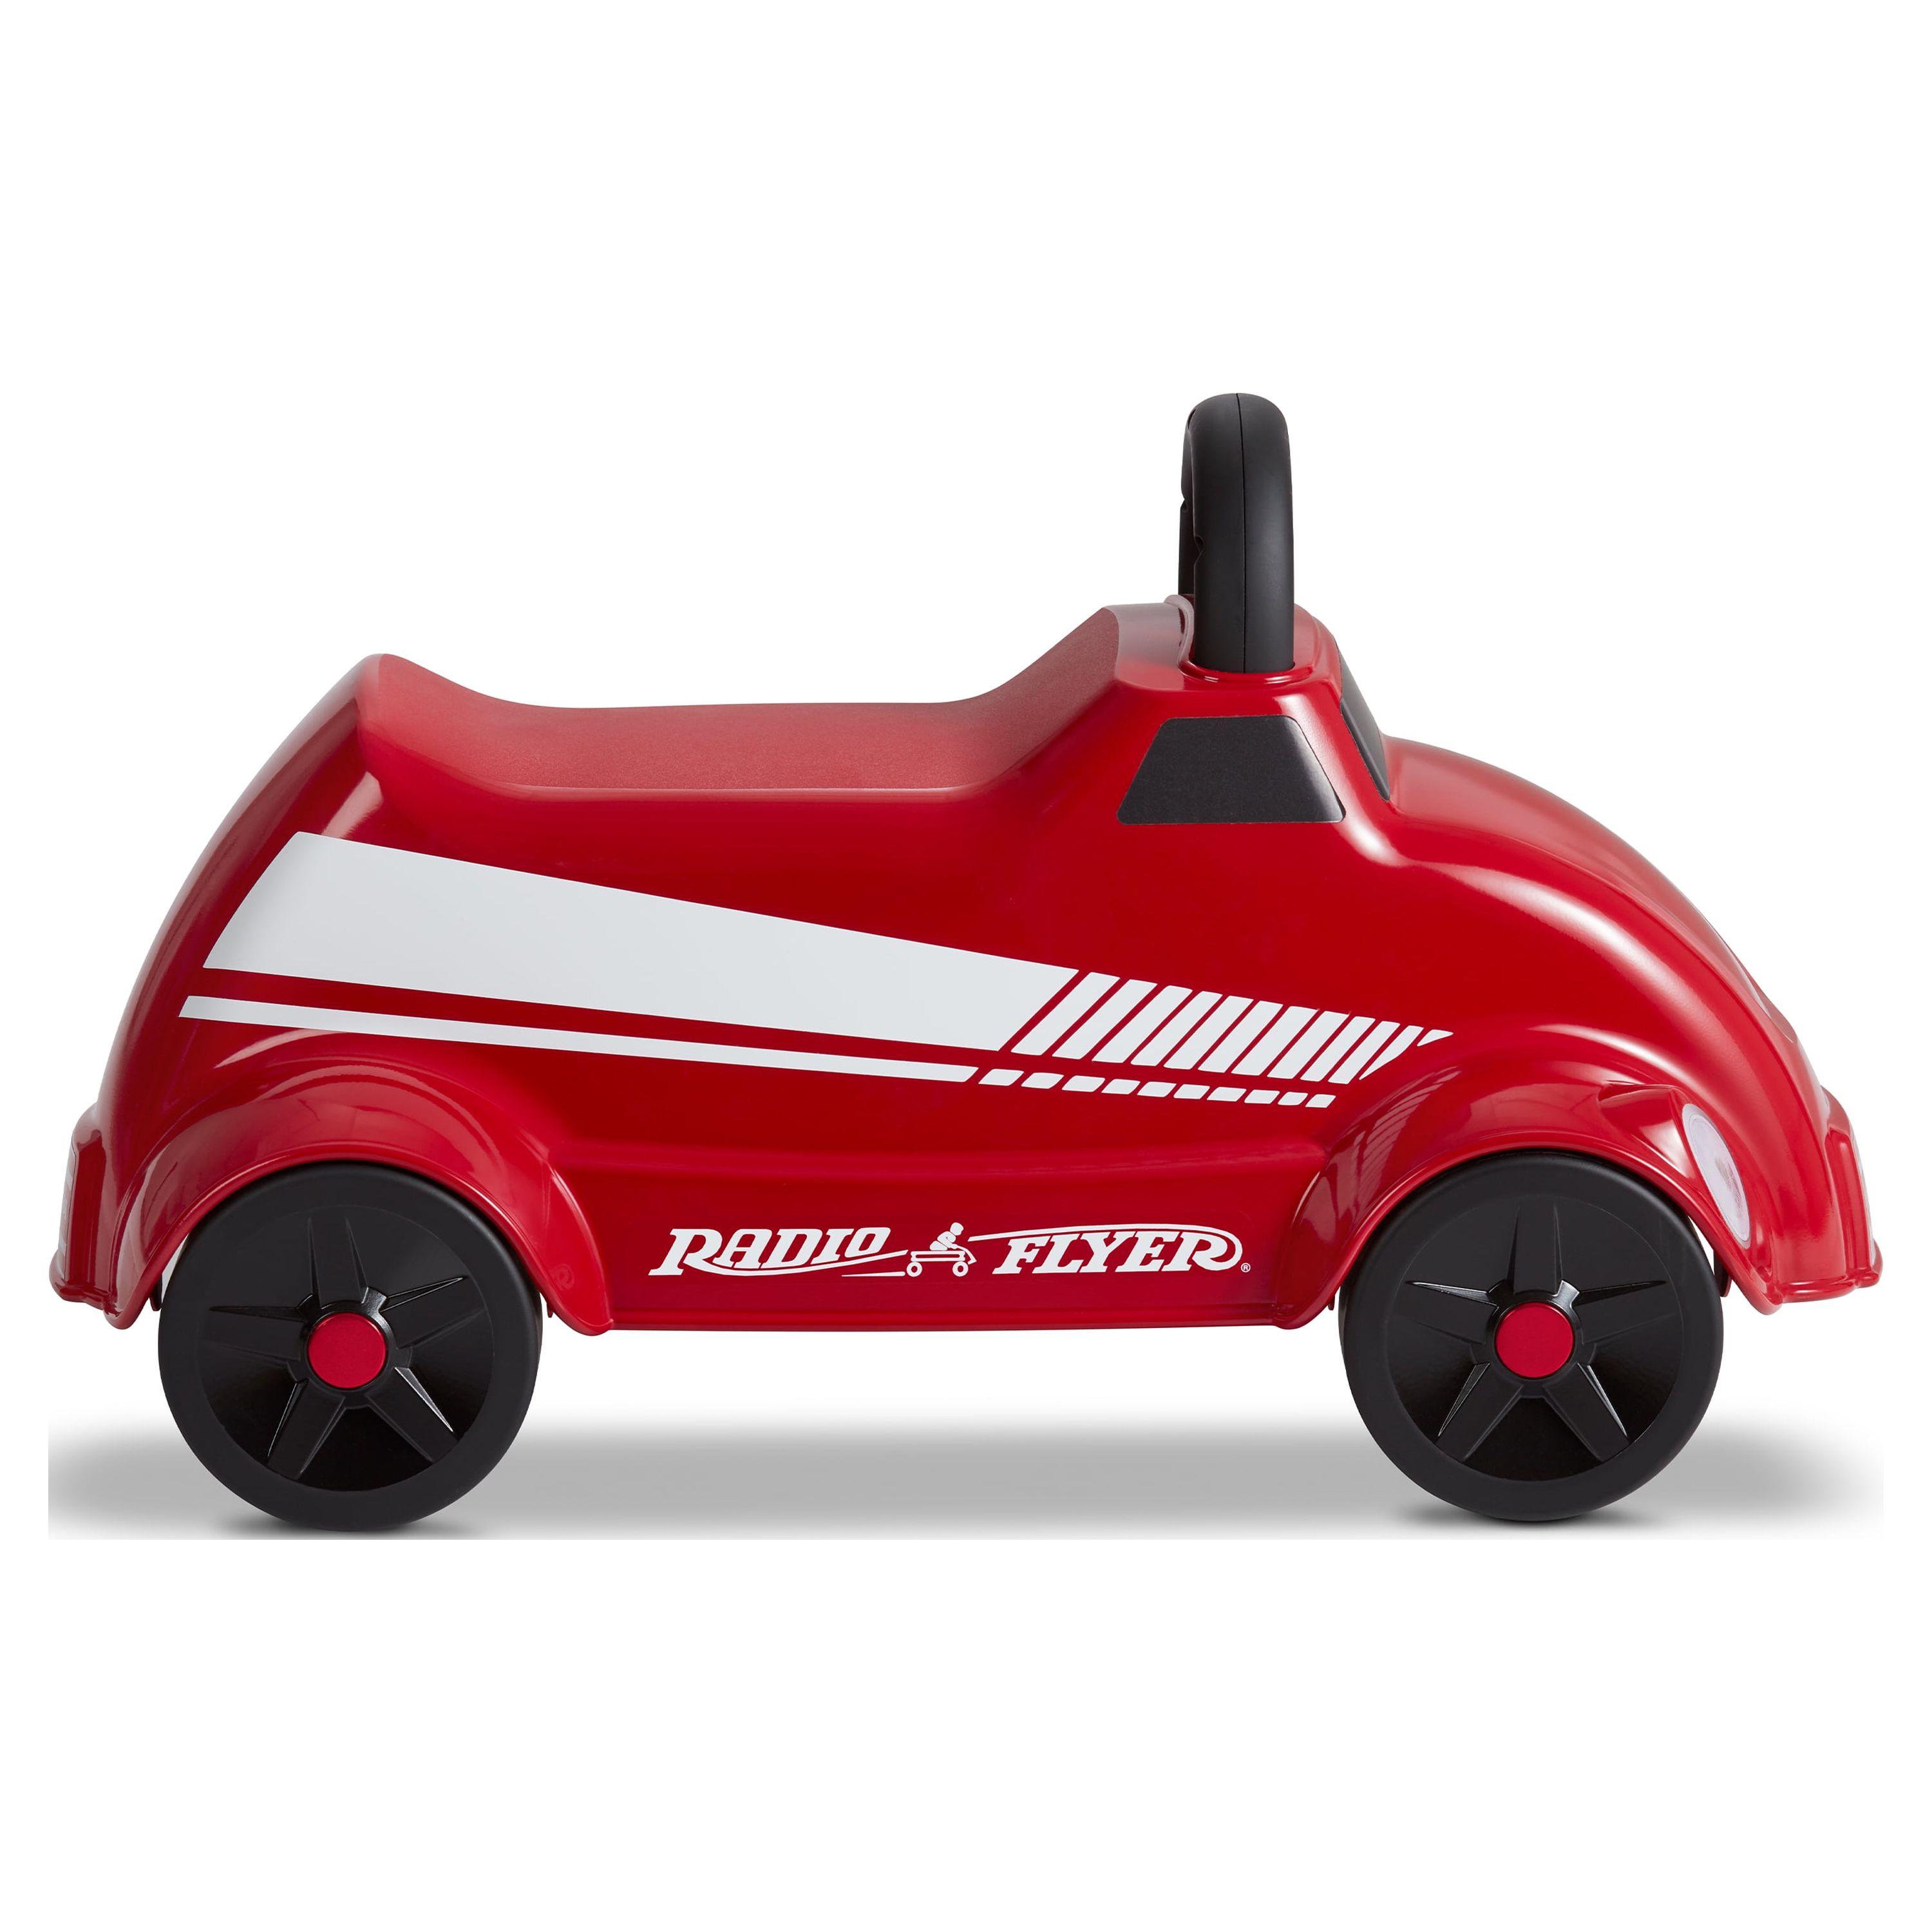 Radio Flyer, My 1st Race Car, Ride-on for Kids, Red, Kids 1-3 Years - image 3 of 7